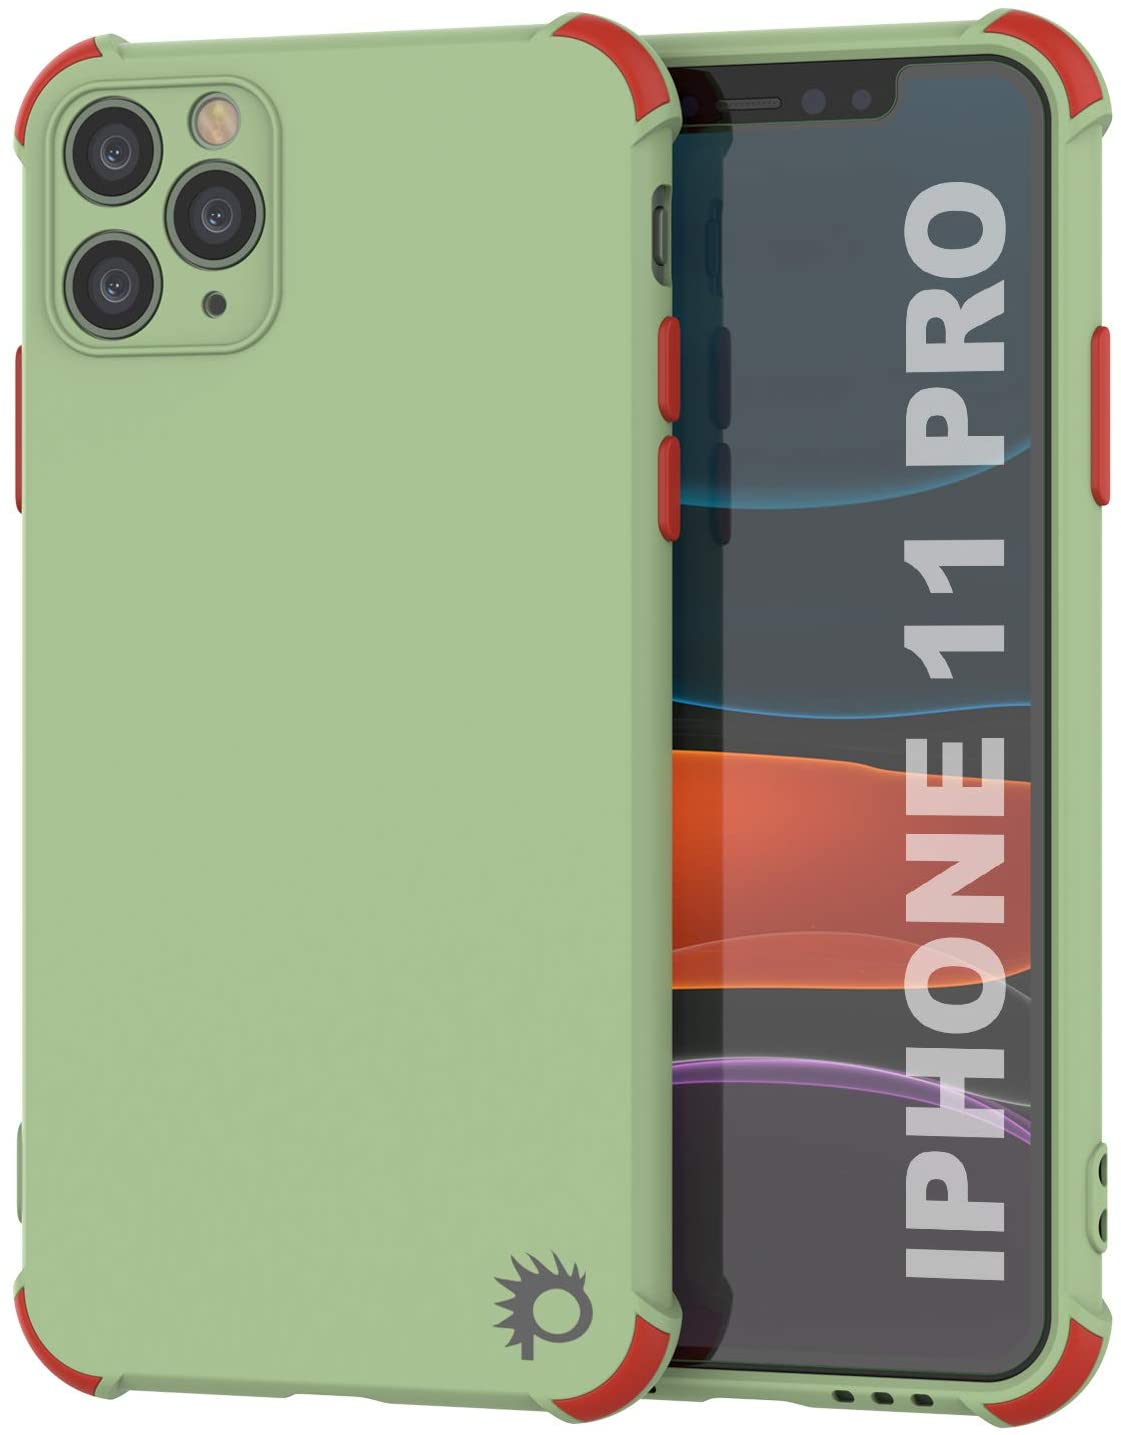 Punkcase Protective & Lightweight TPU Case [Sunshine Series] for iPhone 11 Pro [Light Green] (Color in image: Light Green)